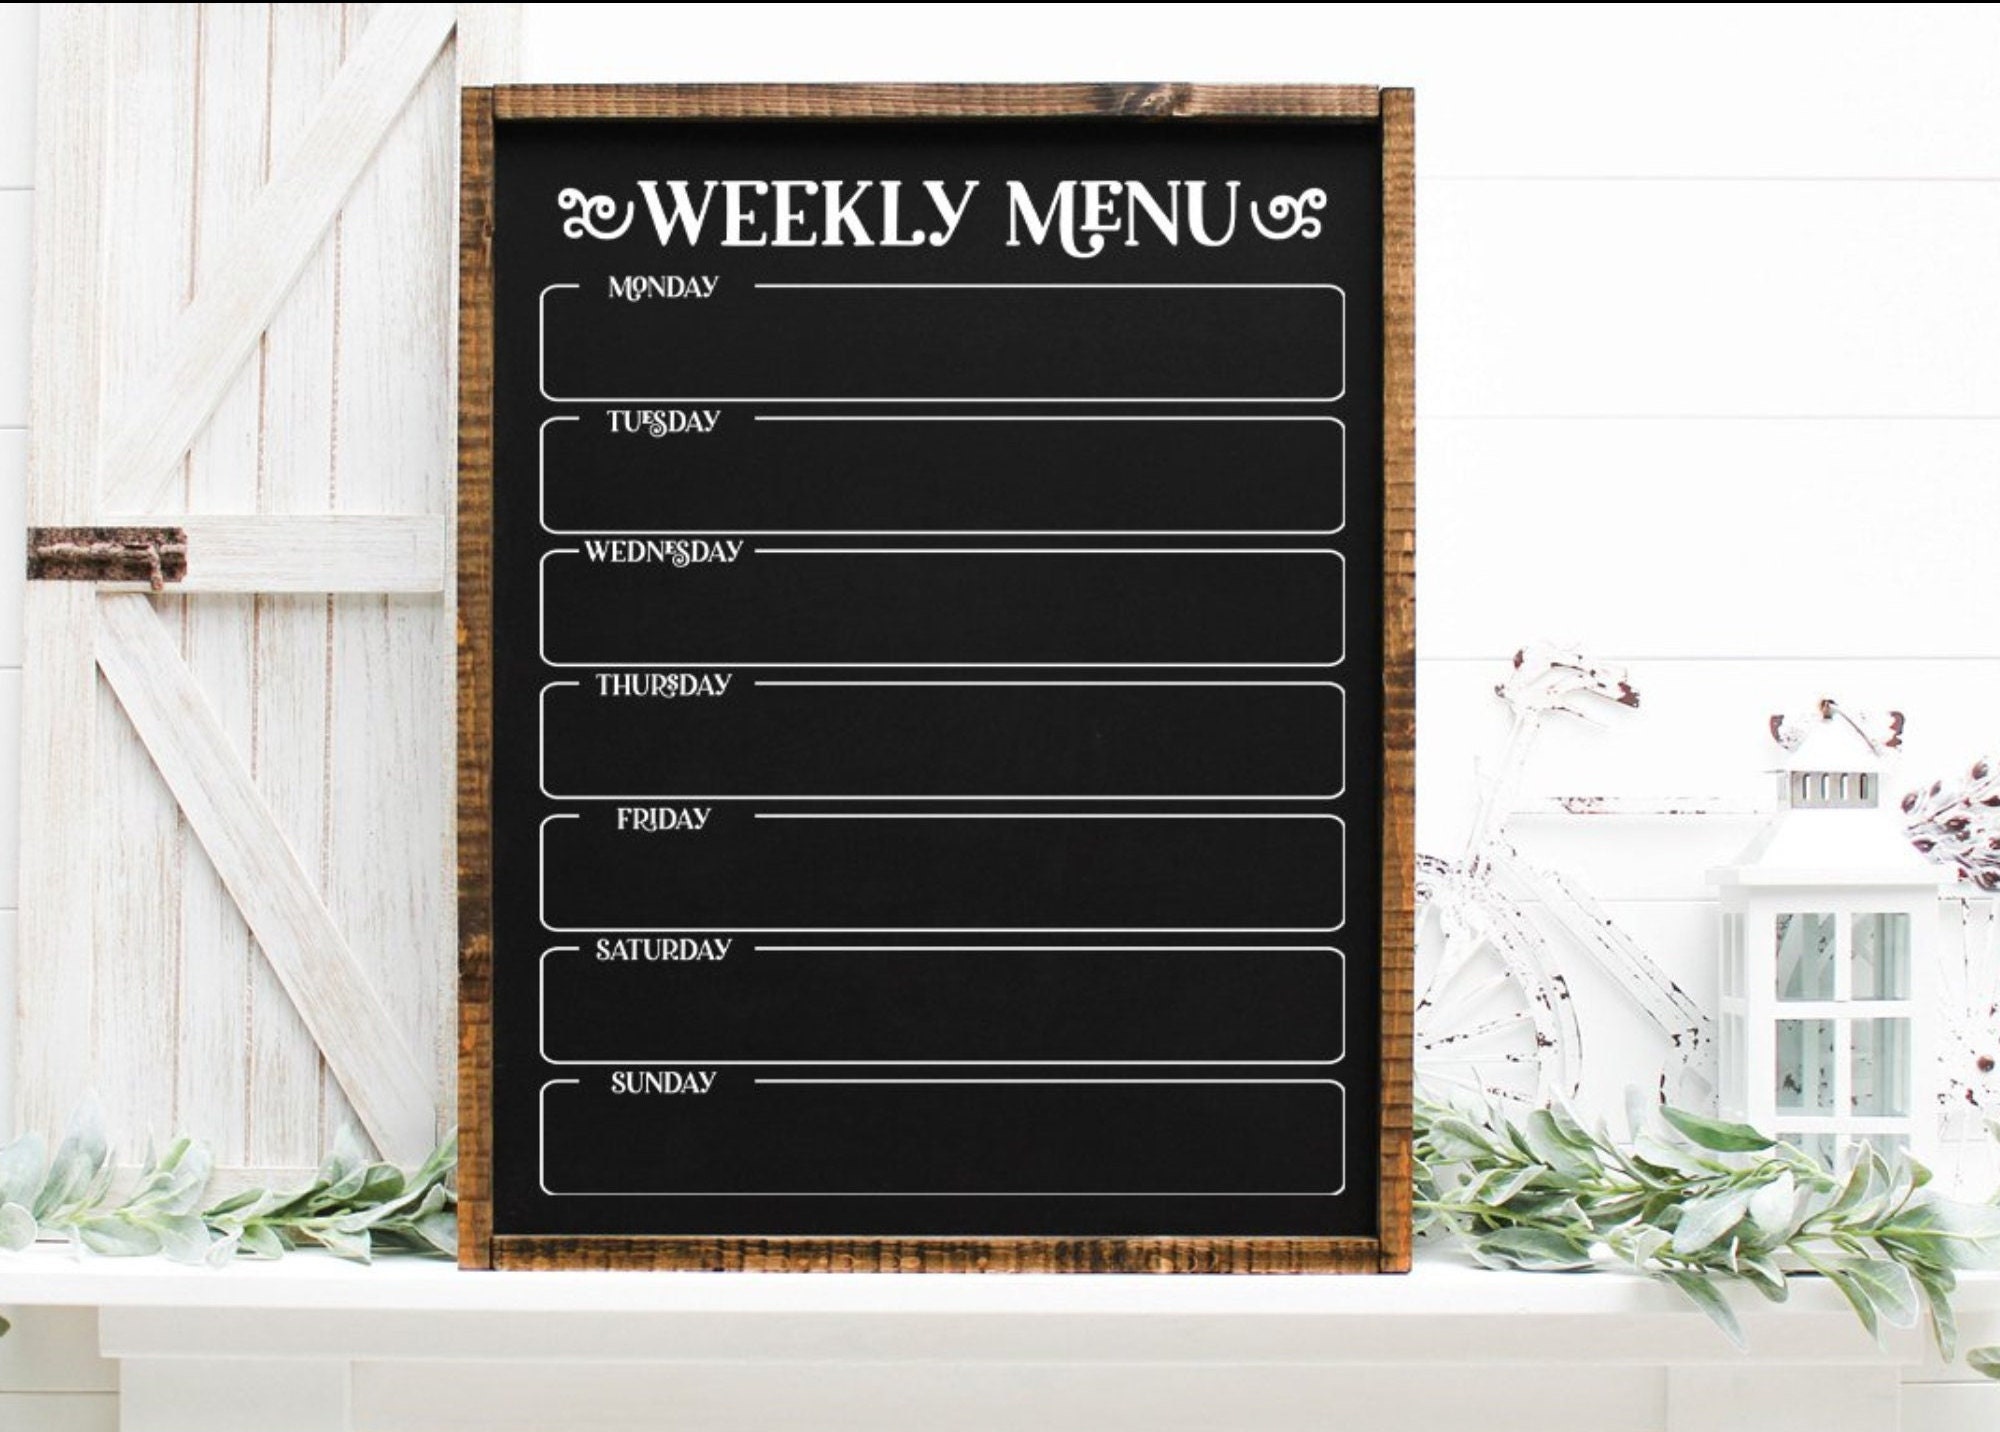 Whiteboard Wallpaper Peel And Stick Wall Decal For Weekly Menus Wallpaper  Wall Decal Weekly Whiteboard Stickers PVC Wallpaper Dr - AliExpress